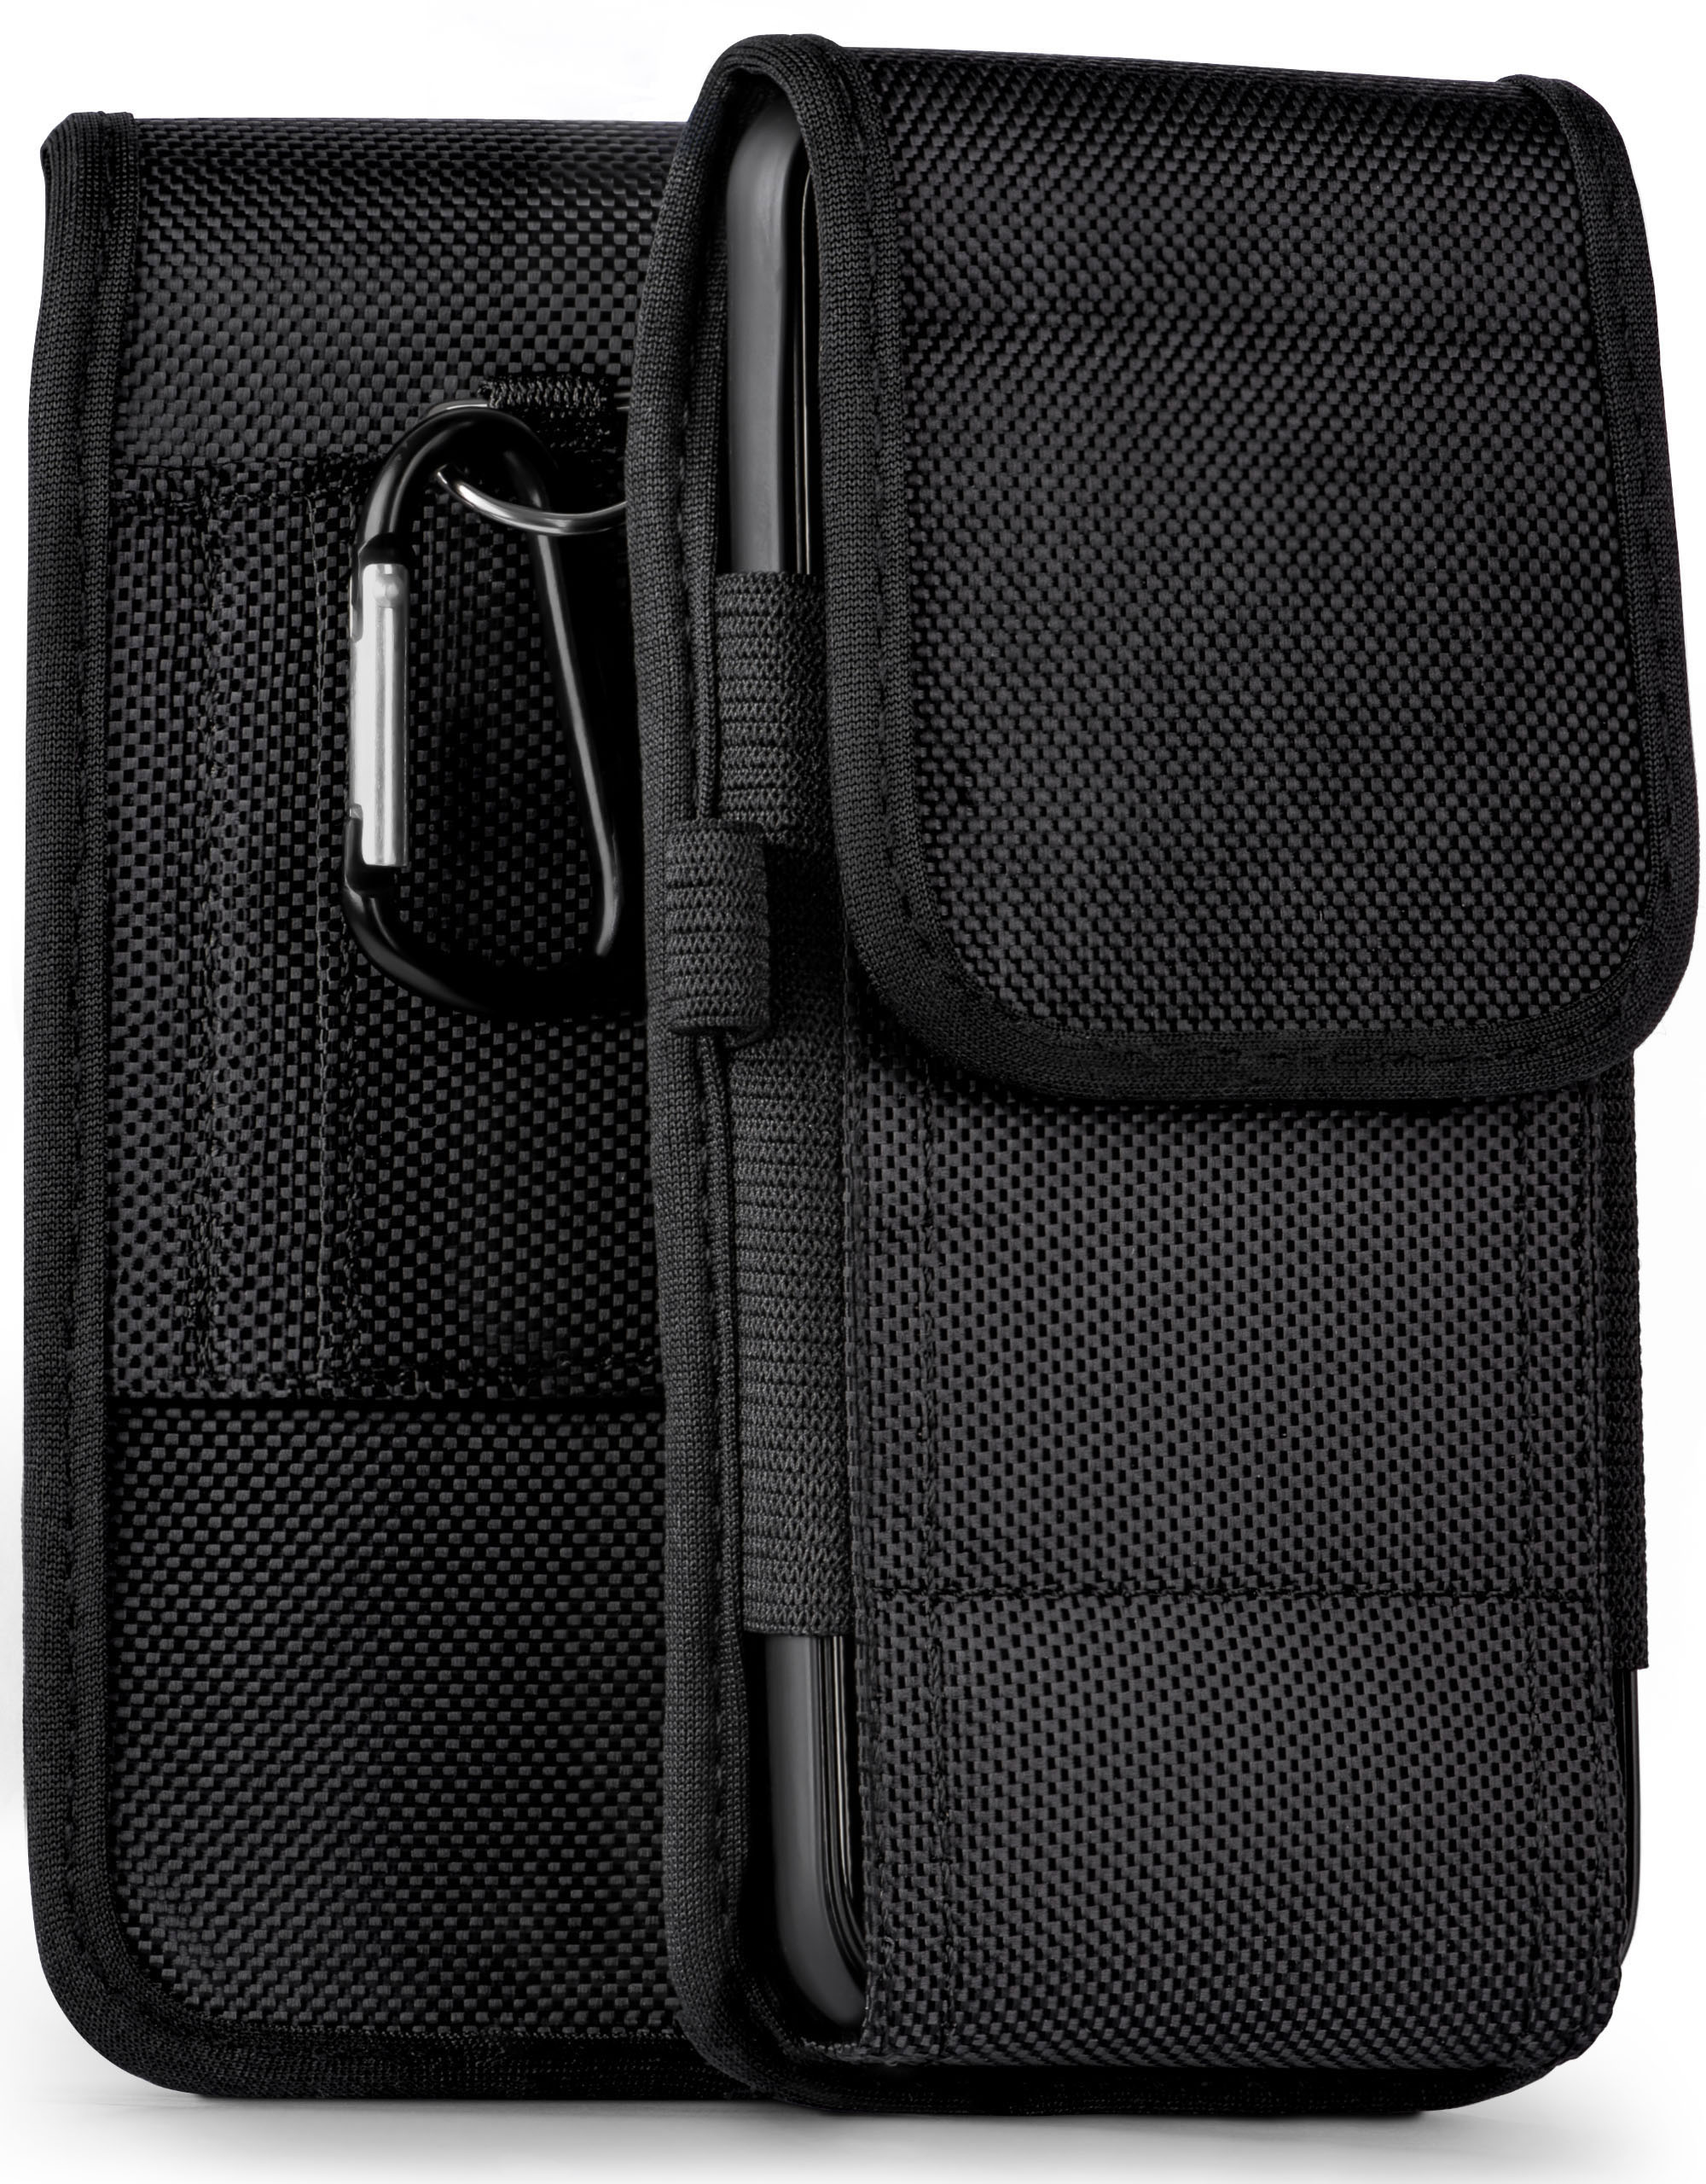 Case, Trail MOEX Holster, Xperia Agility Sony, Z3,